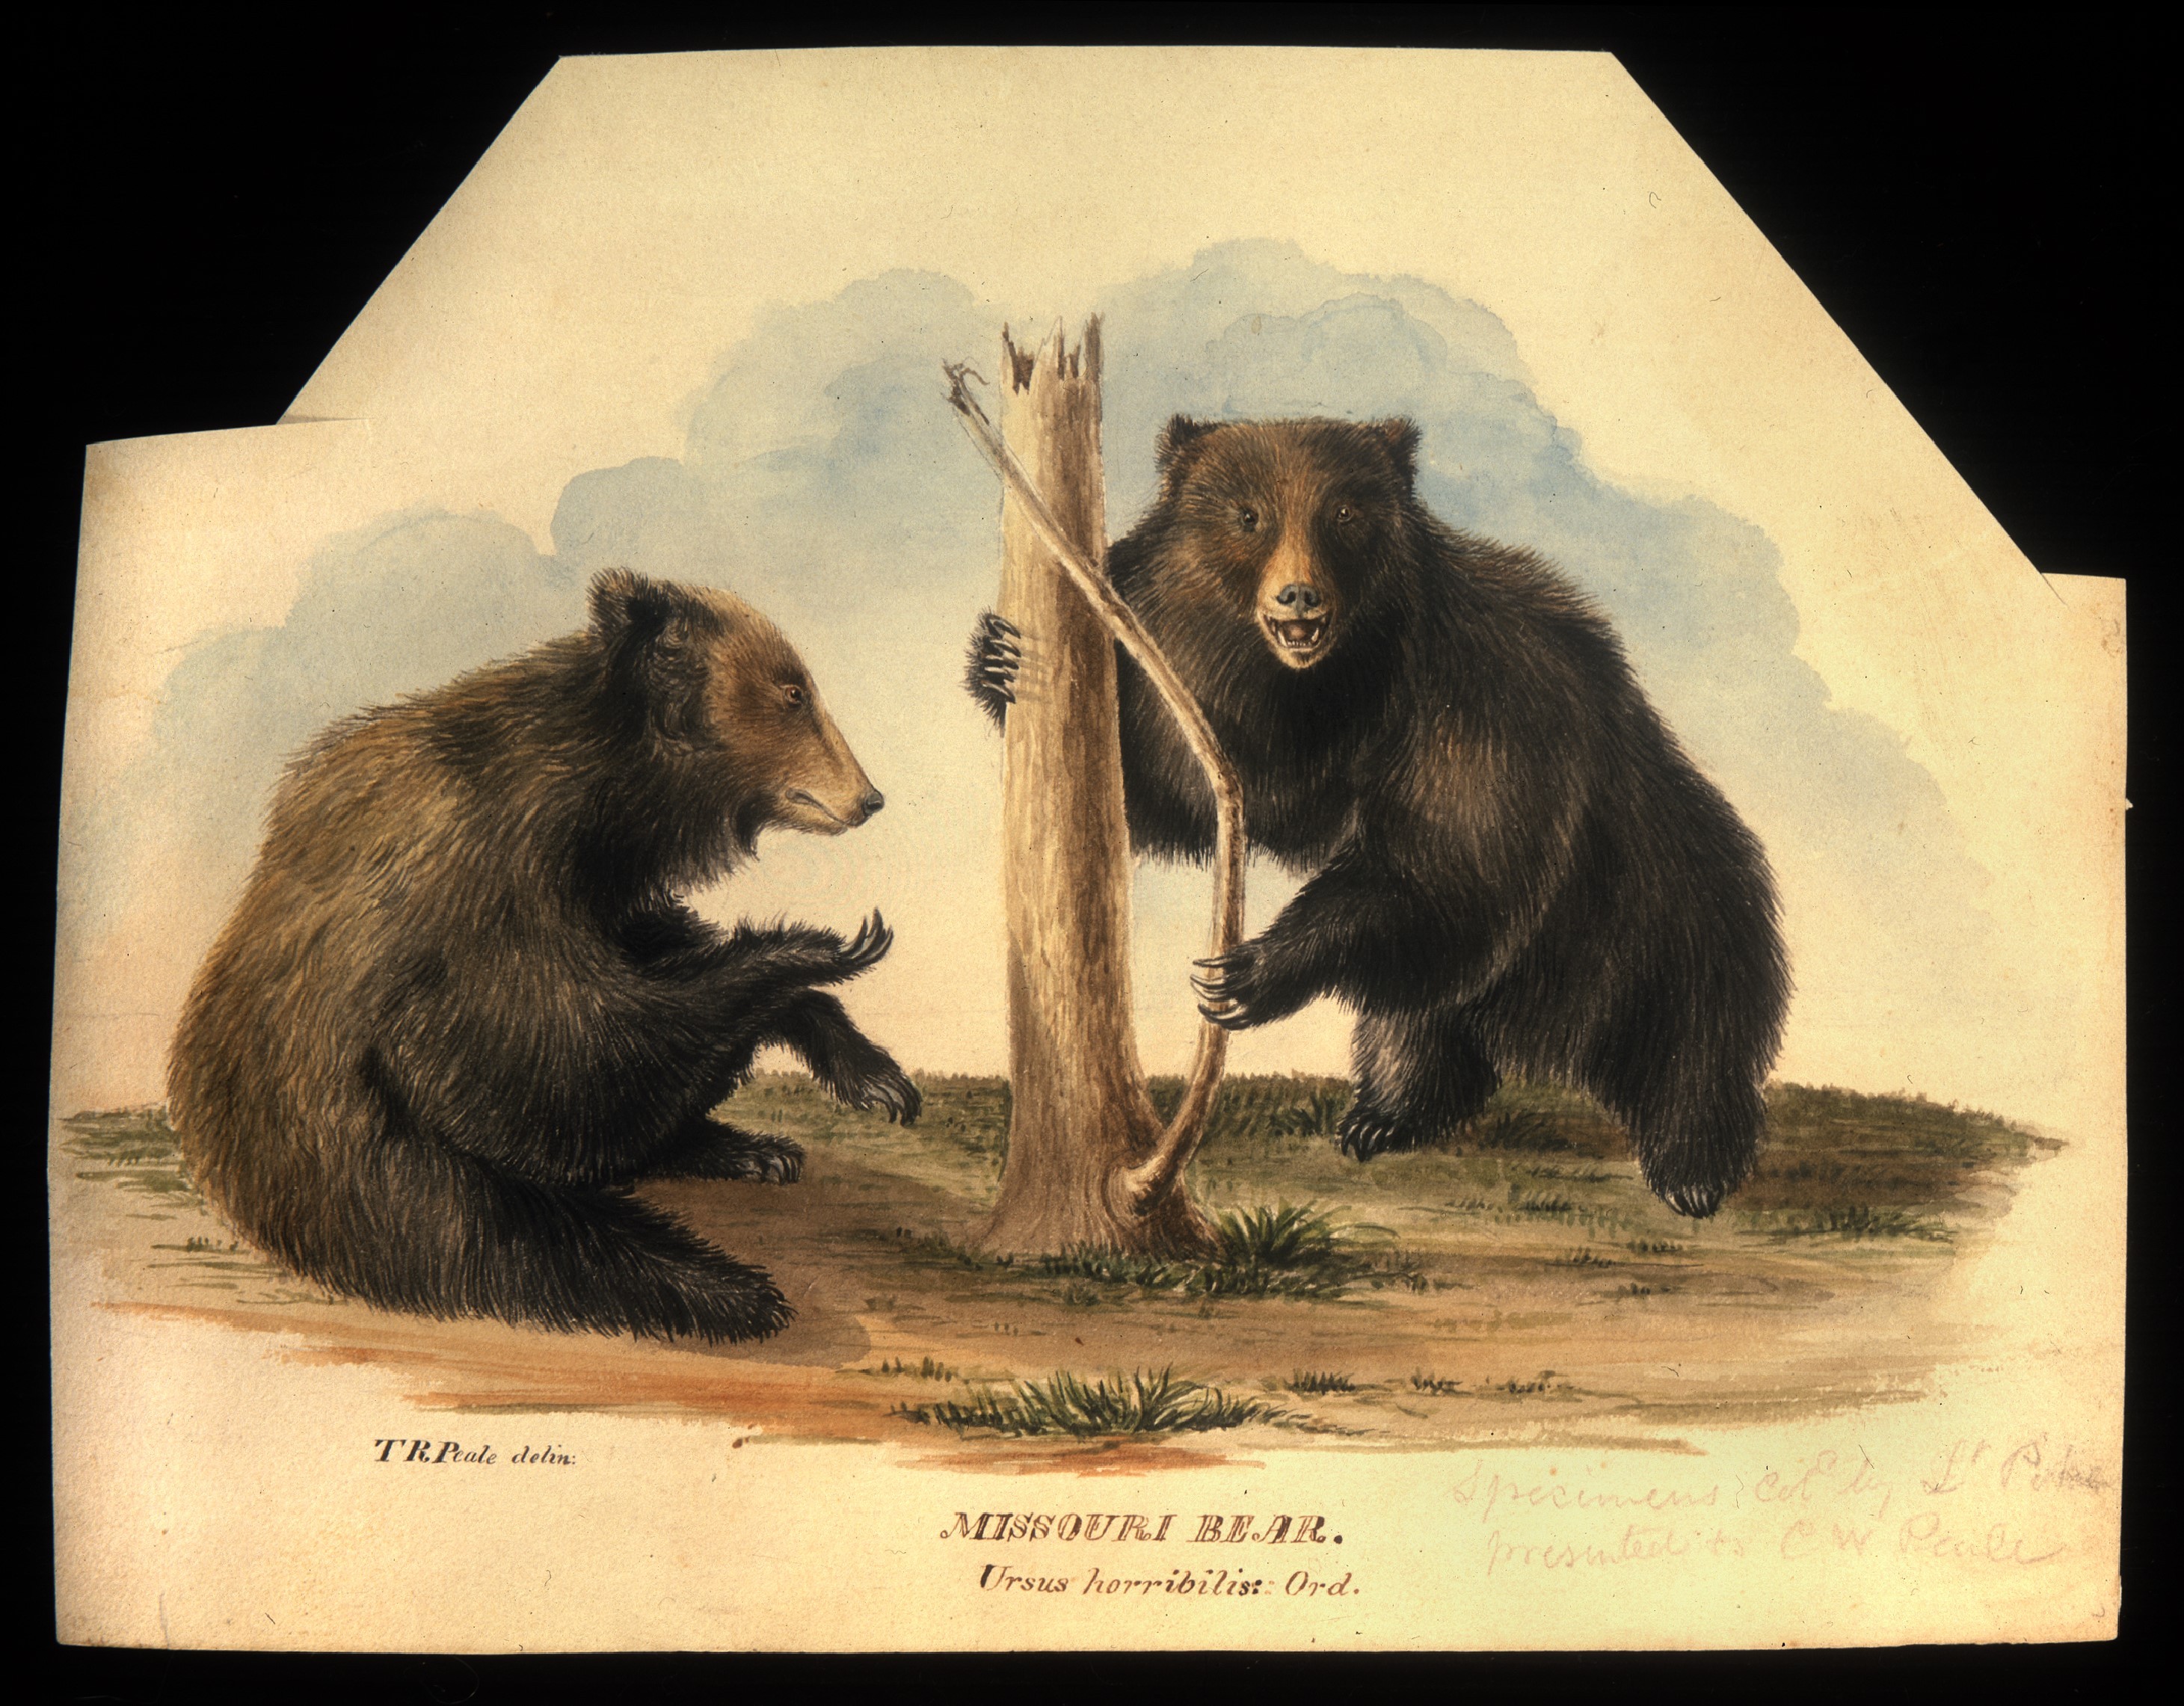 Watercolor and graphite image of two brown bears, one seated and one on two legs holding a tree trunk. 